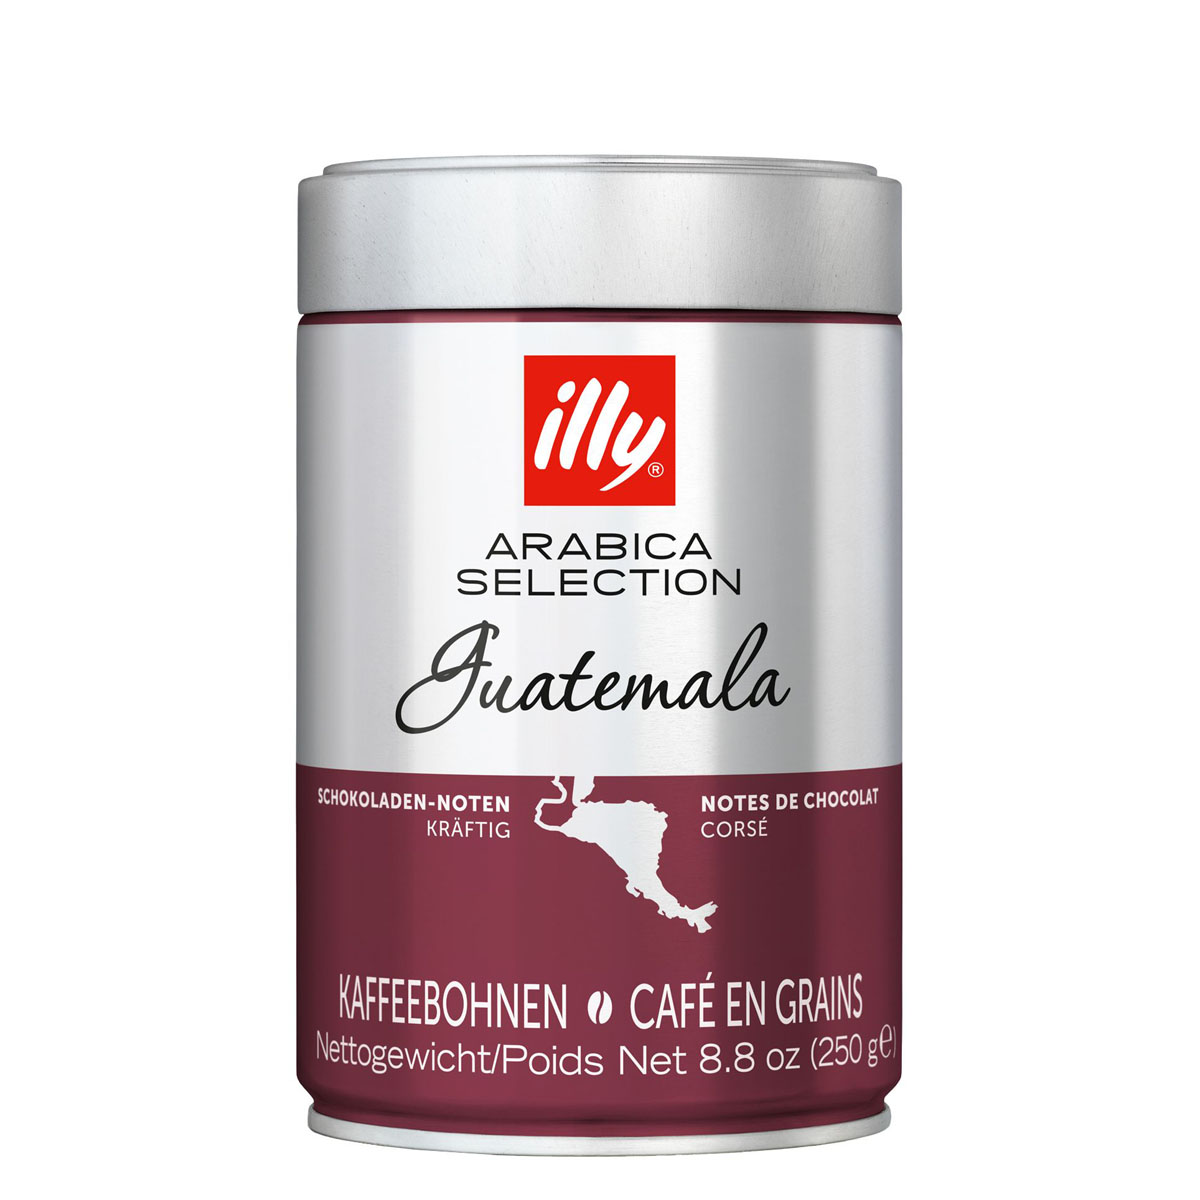 illy monoarabica guatemala 250g Cafea Boabe Doncafe Selected